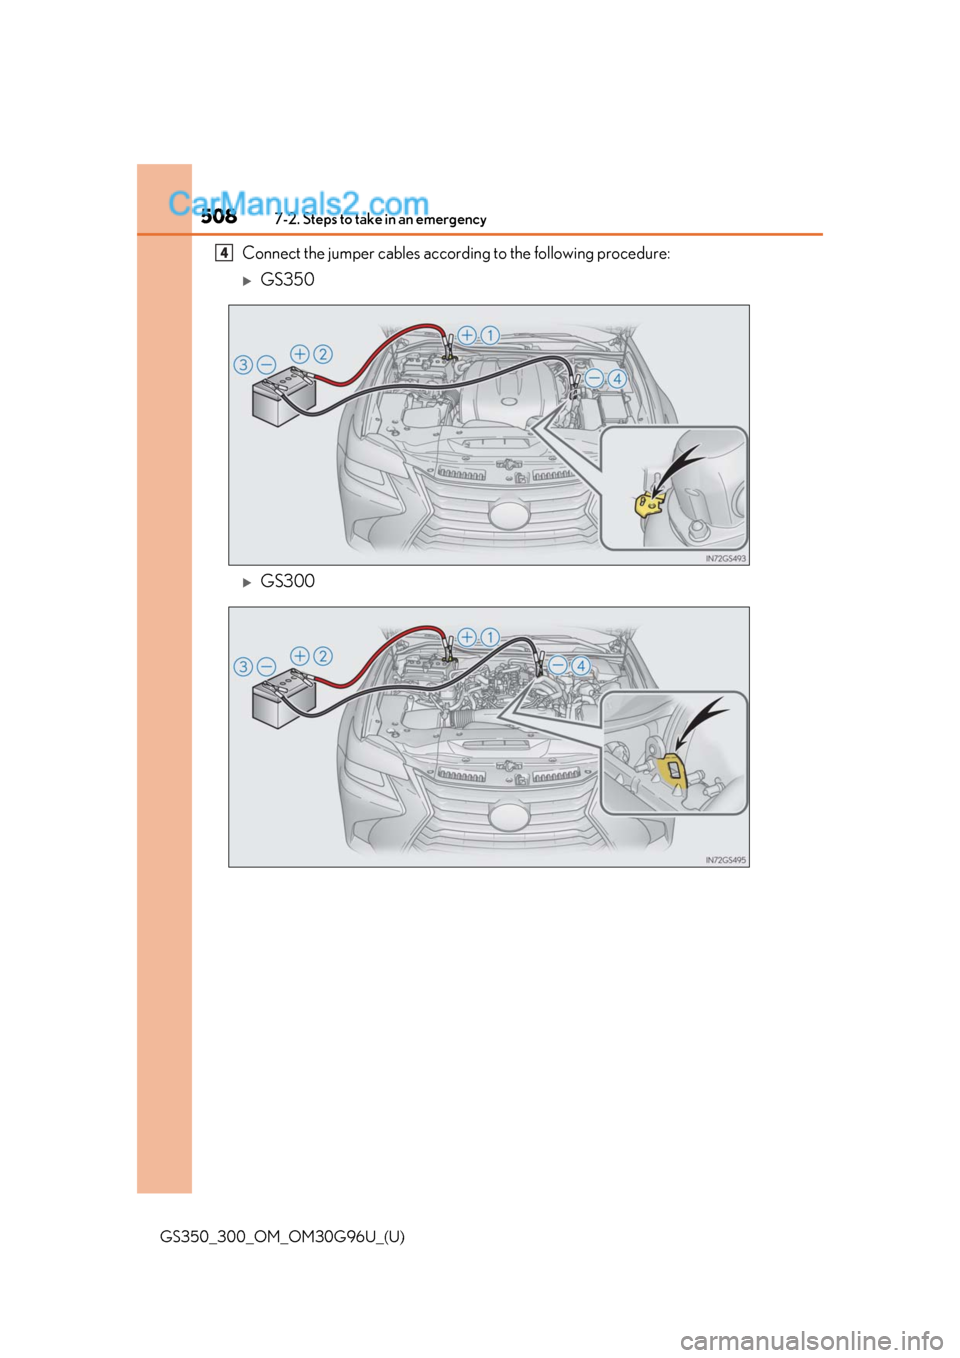 Lexus GS300 2019  Owners Manual 5087-2. Steps to take in an emergency
GS350_300_OM_OM30G96U_(U)
Connect the jumper cables according to the following procedure:
GS350
GS300
4  